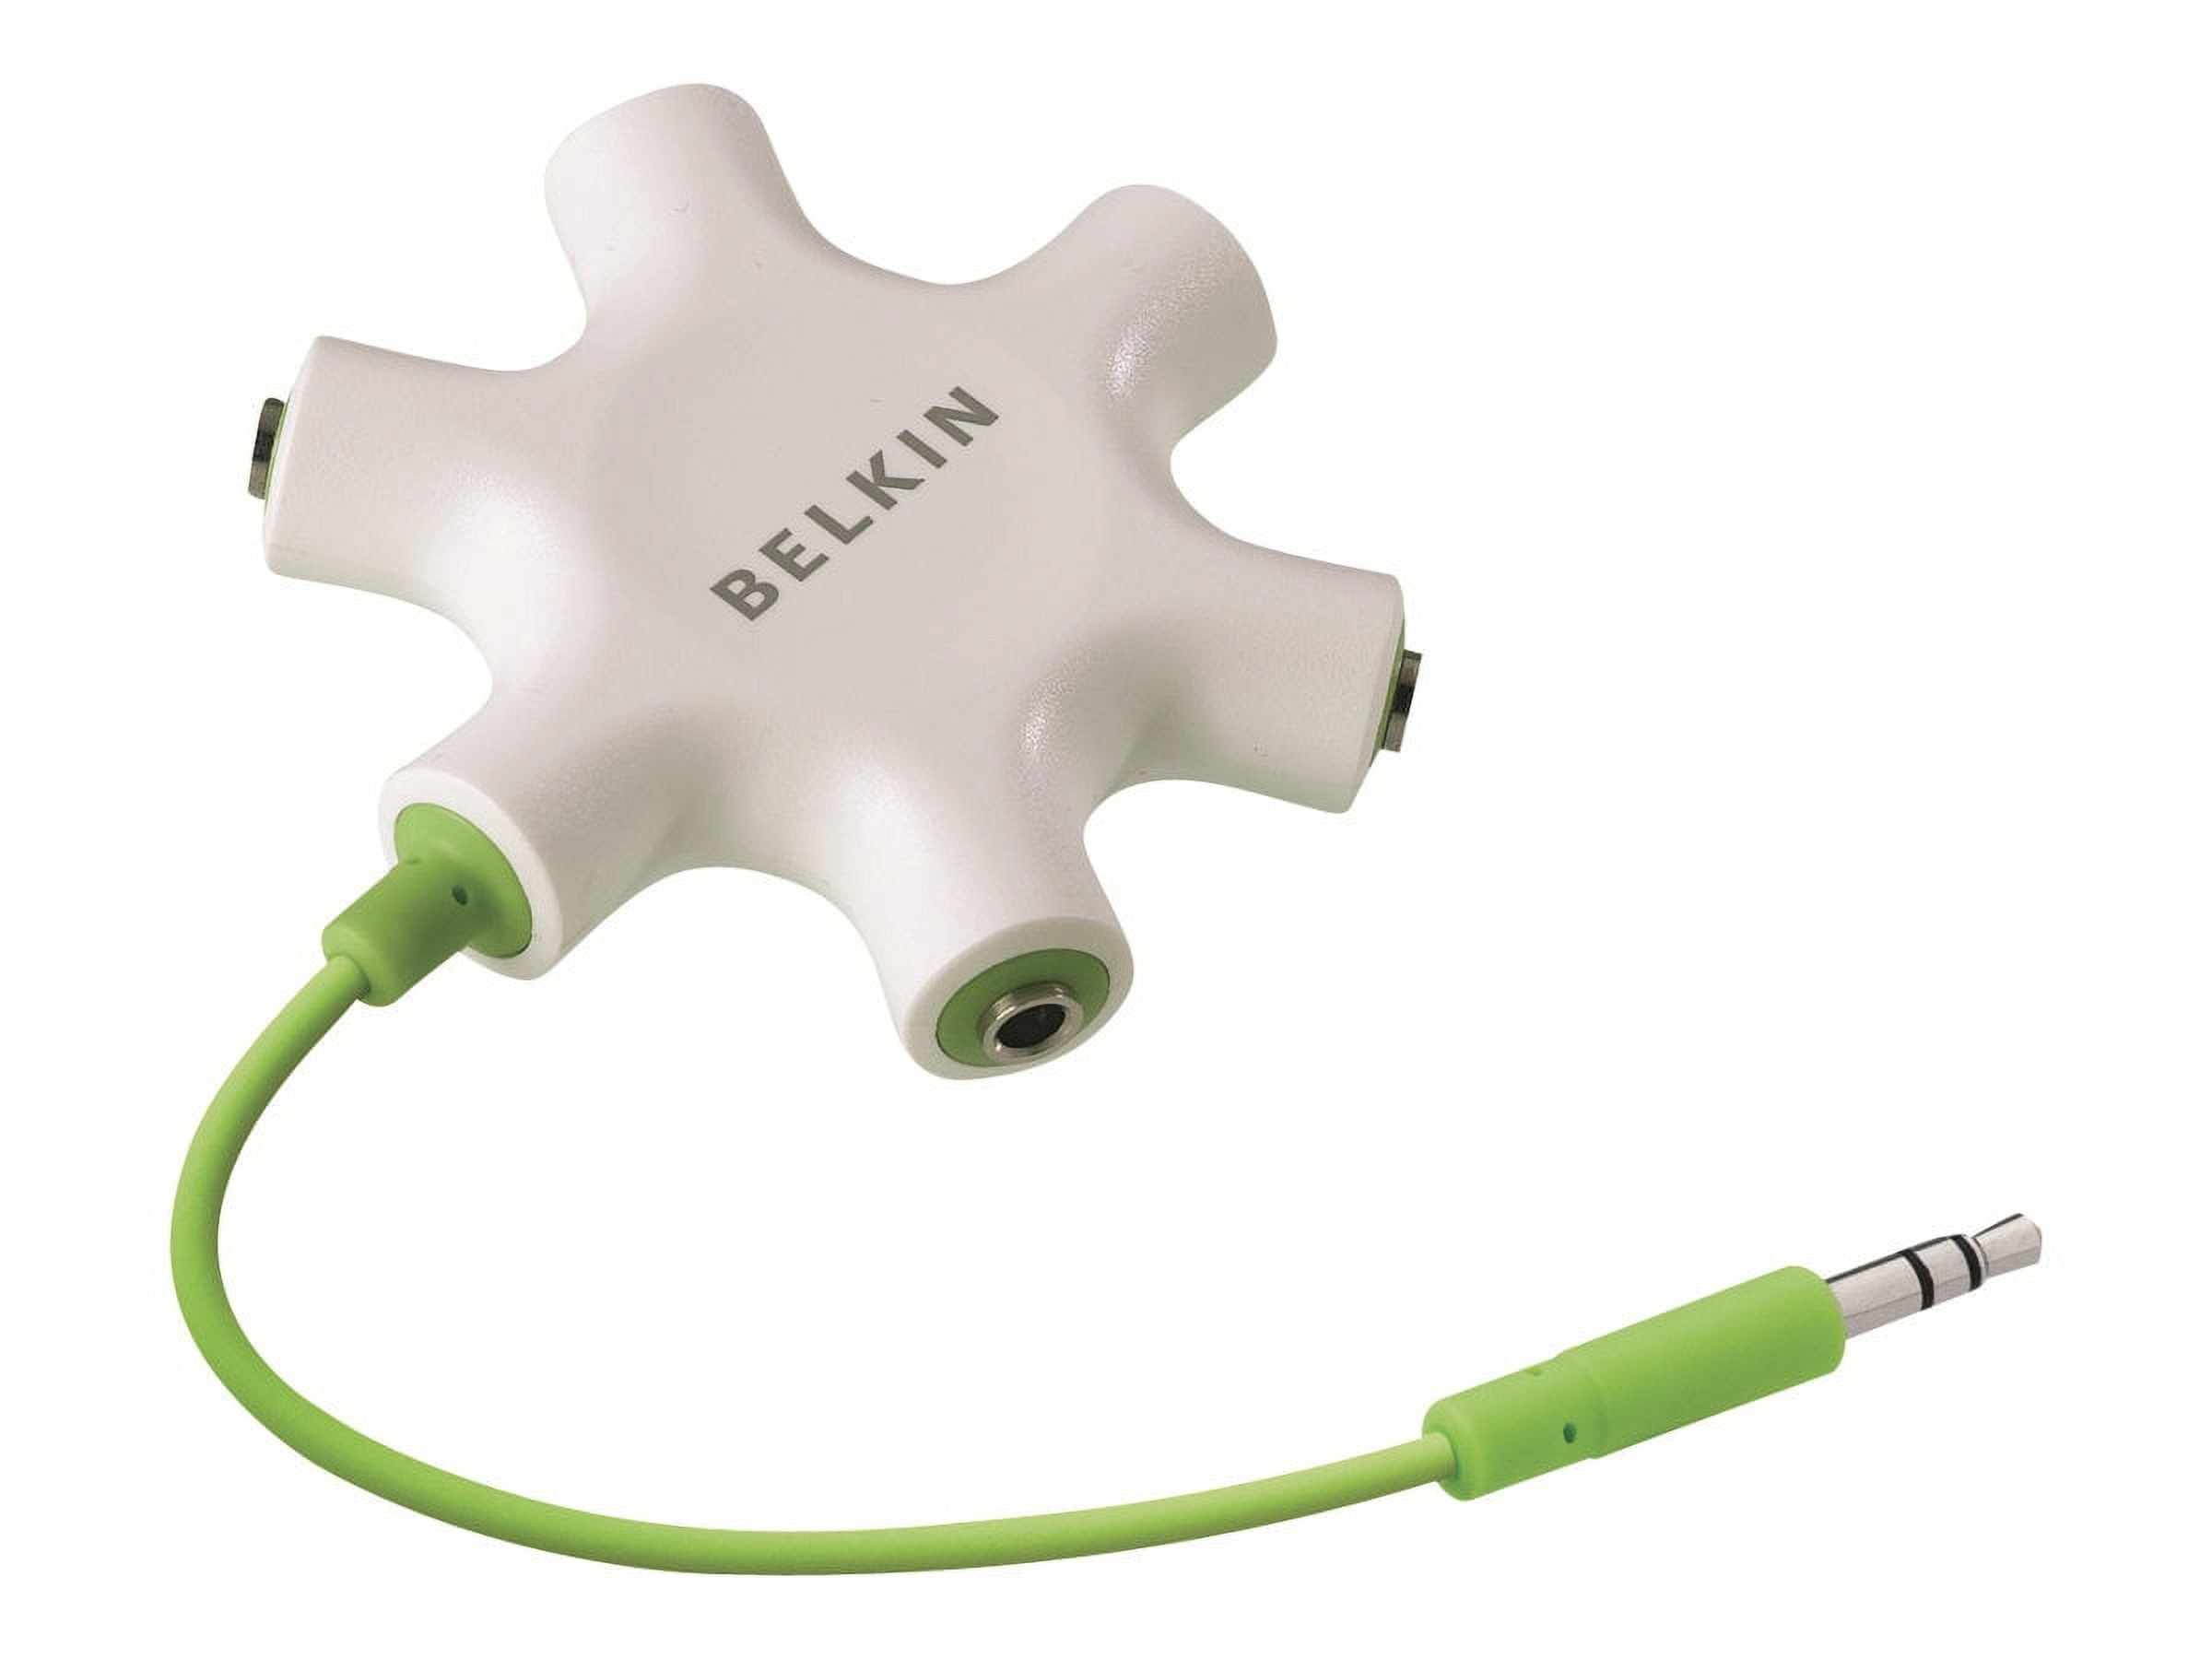 Belkin Rockstar 5-Jack Multi Headphone Audio Splitter (Black) - Headphone  Splitter Designed To Connect Up To 5 Devices For Classrooms, Audio Mixing 